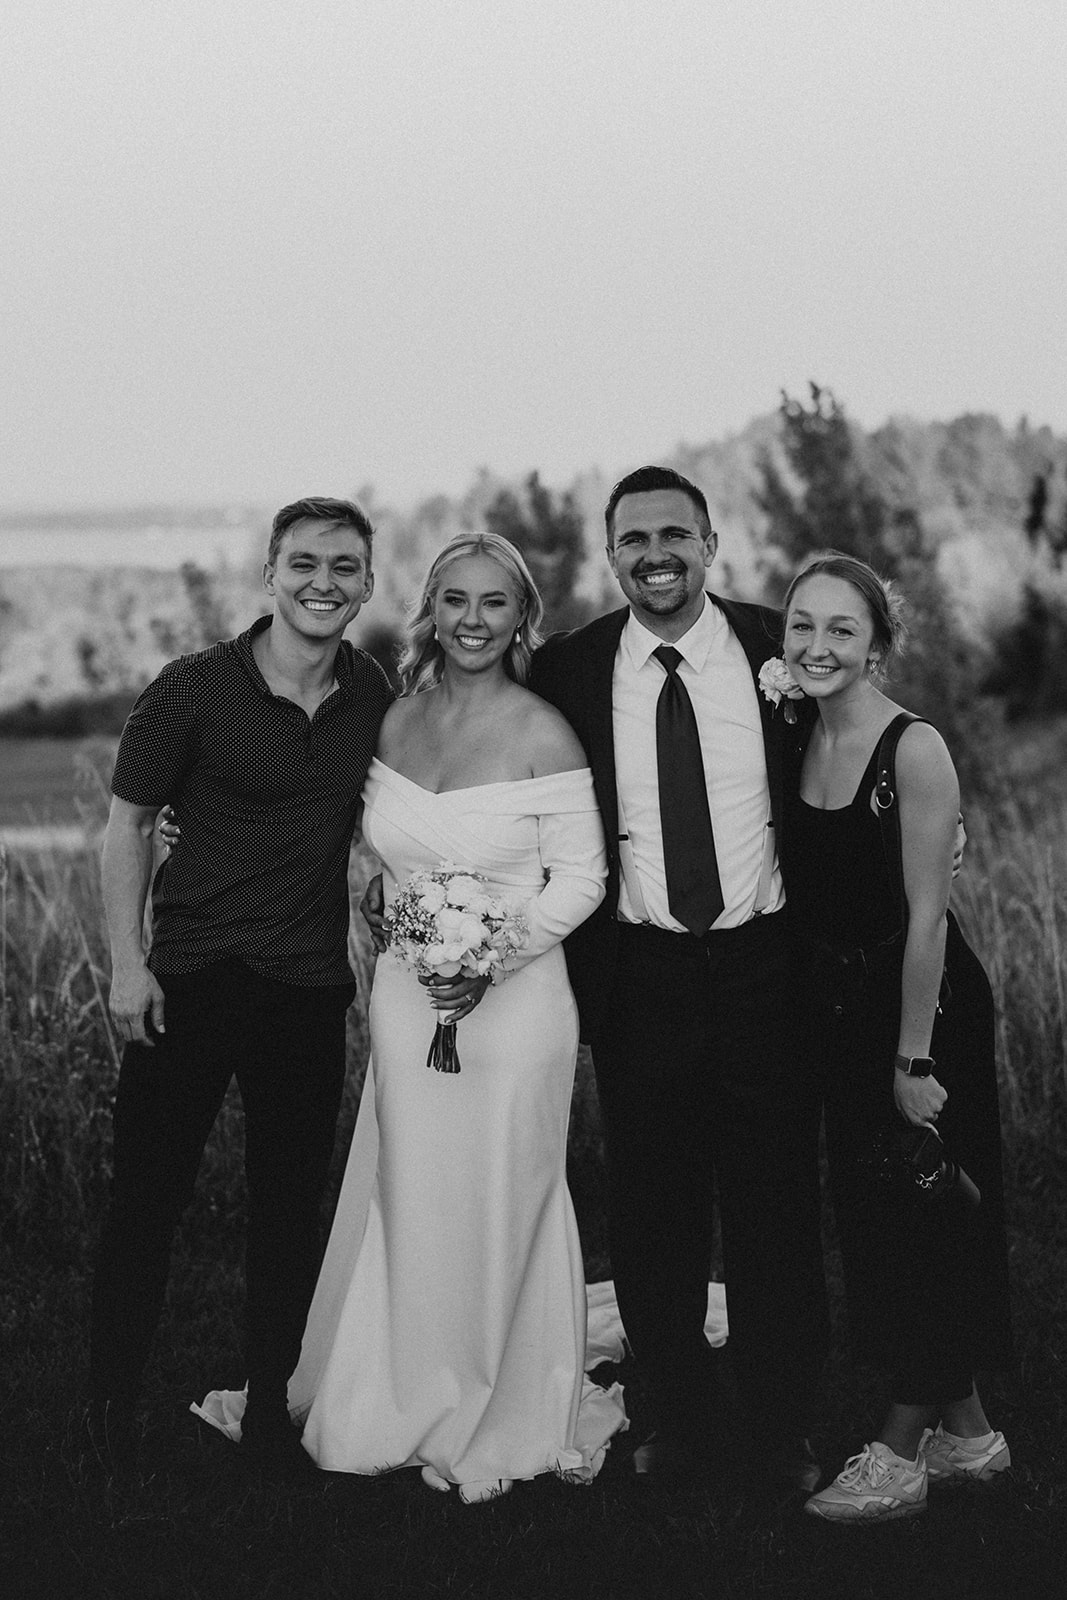 A photographer and videographer taking a photo with a bride and groom 